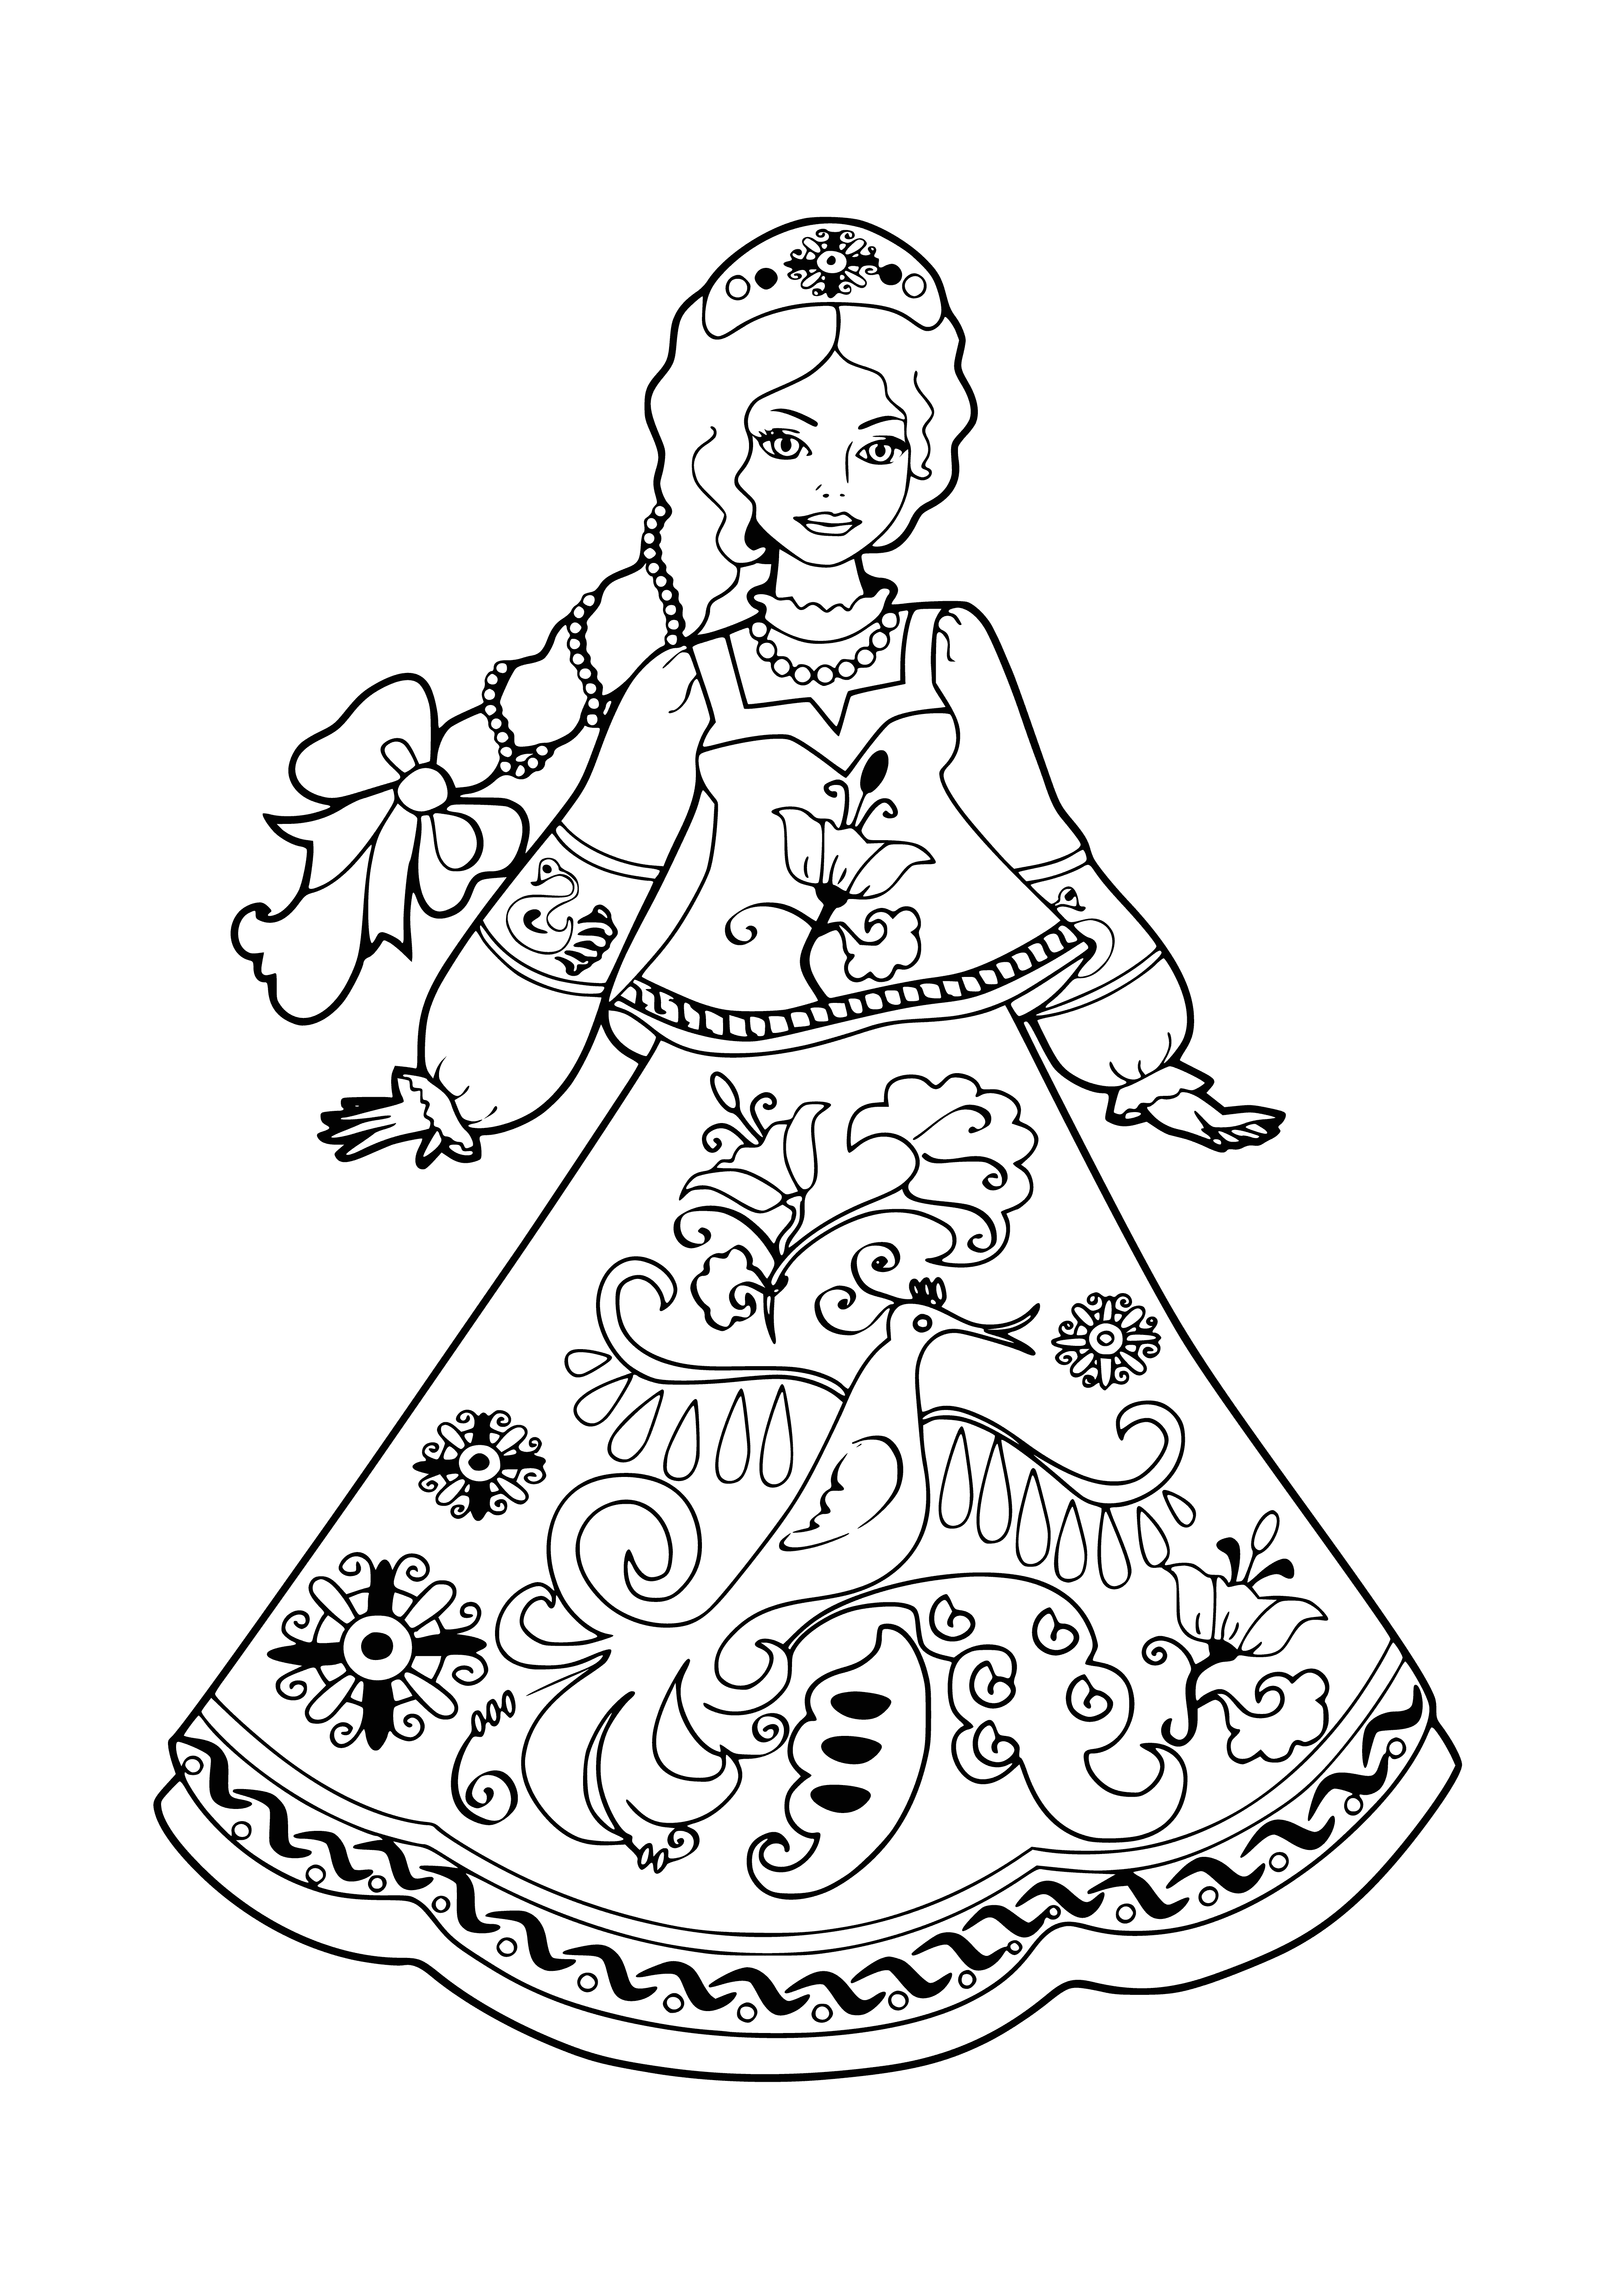 coloring page: Three Russian beauties with long, flowy hair, piercing eyes and unique looks - a coloring page of gorgeous women!